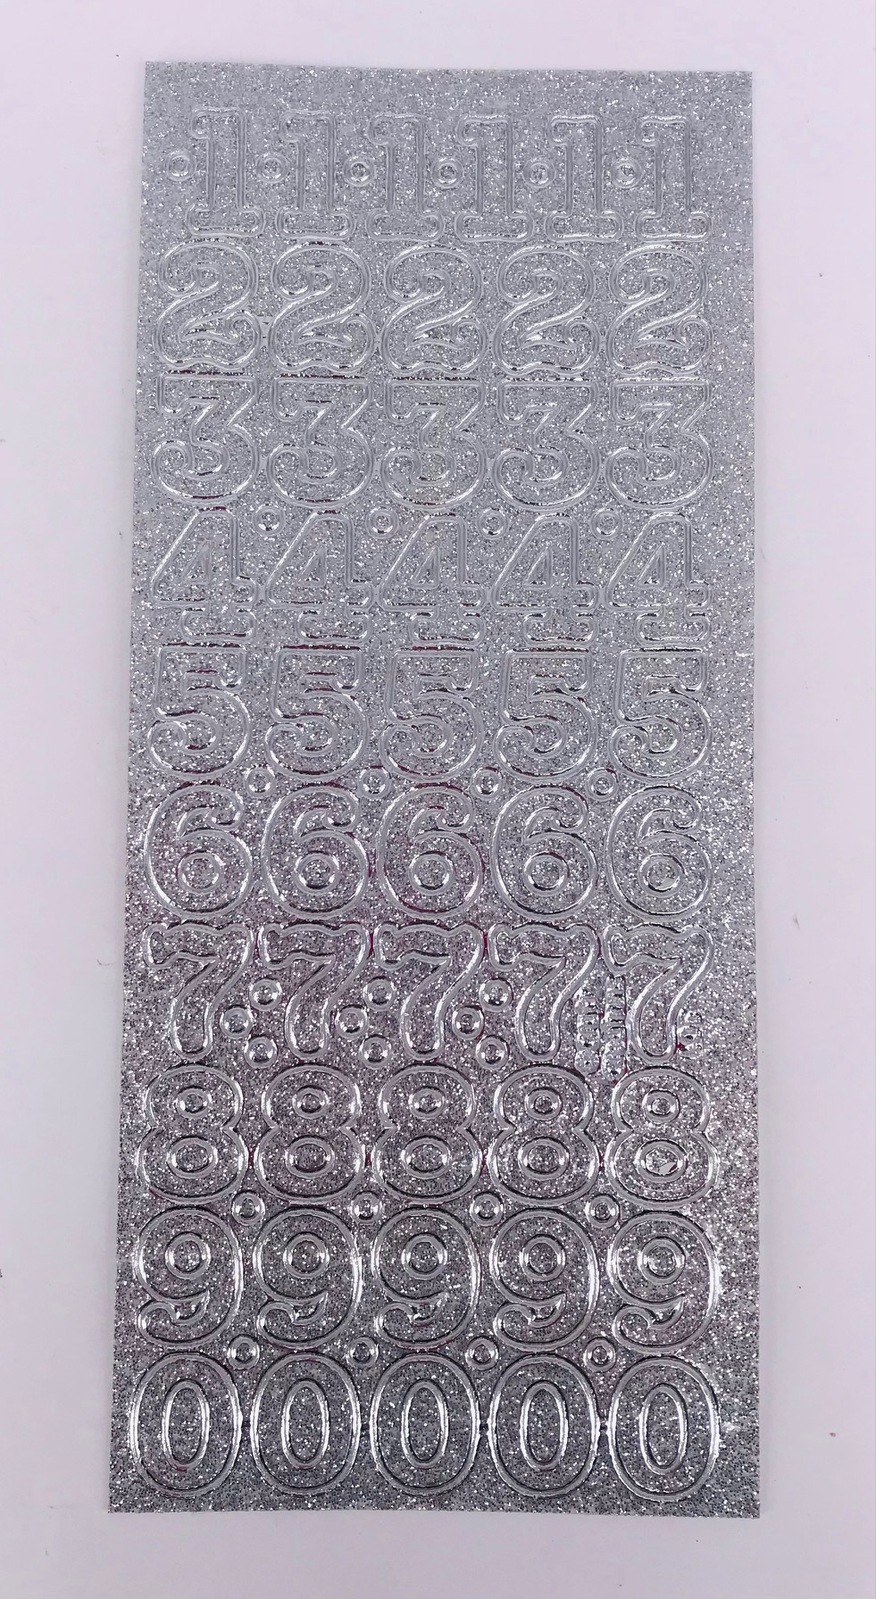 20mm Numbers Self Adhesive Peel Off Stickers SILVER GLITTER